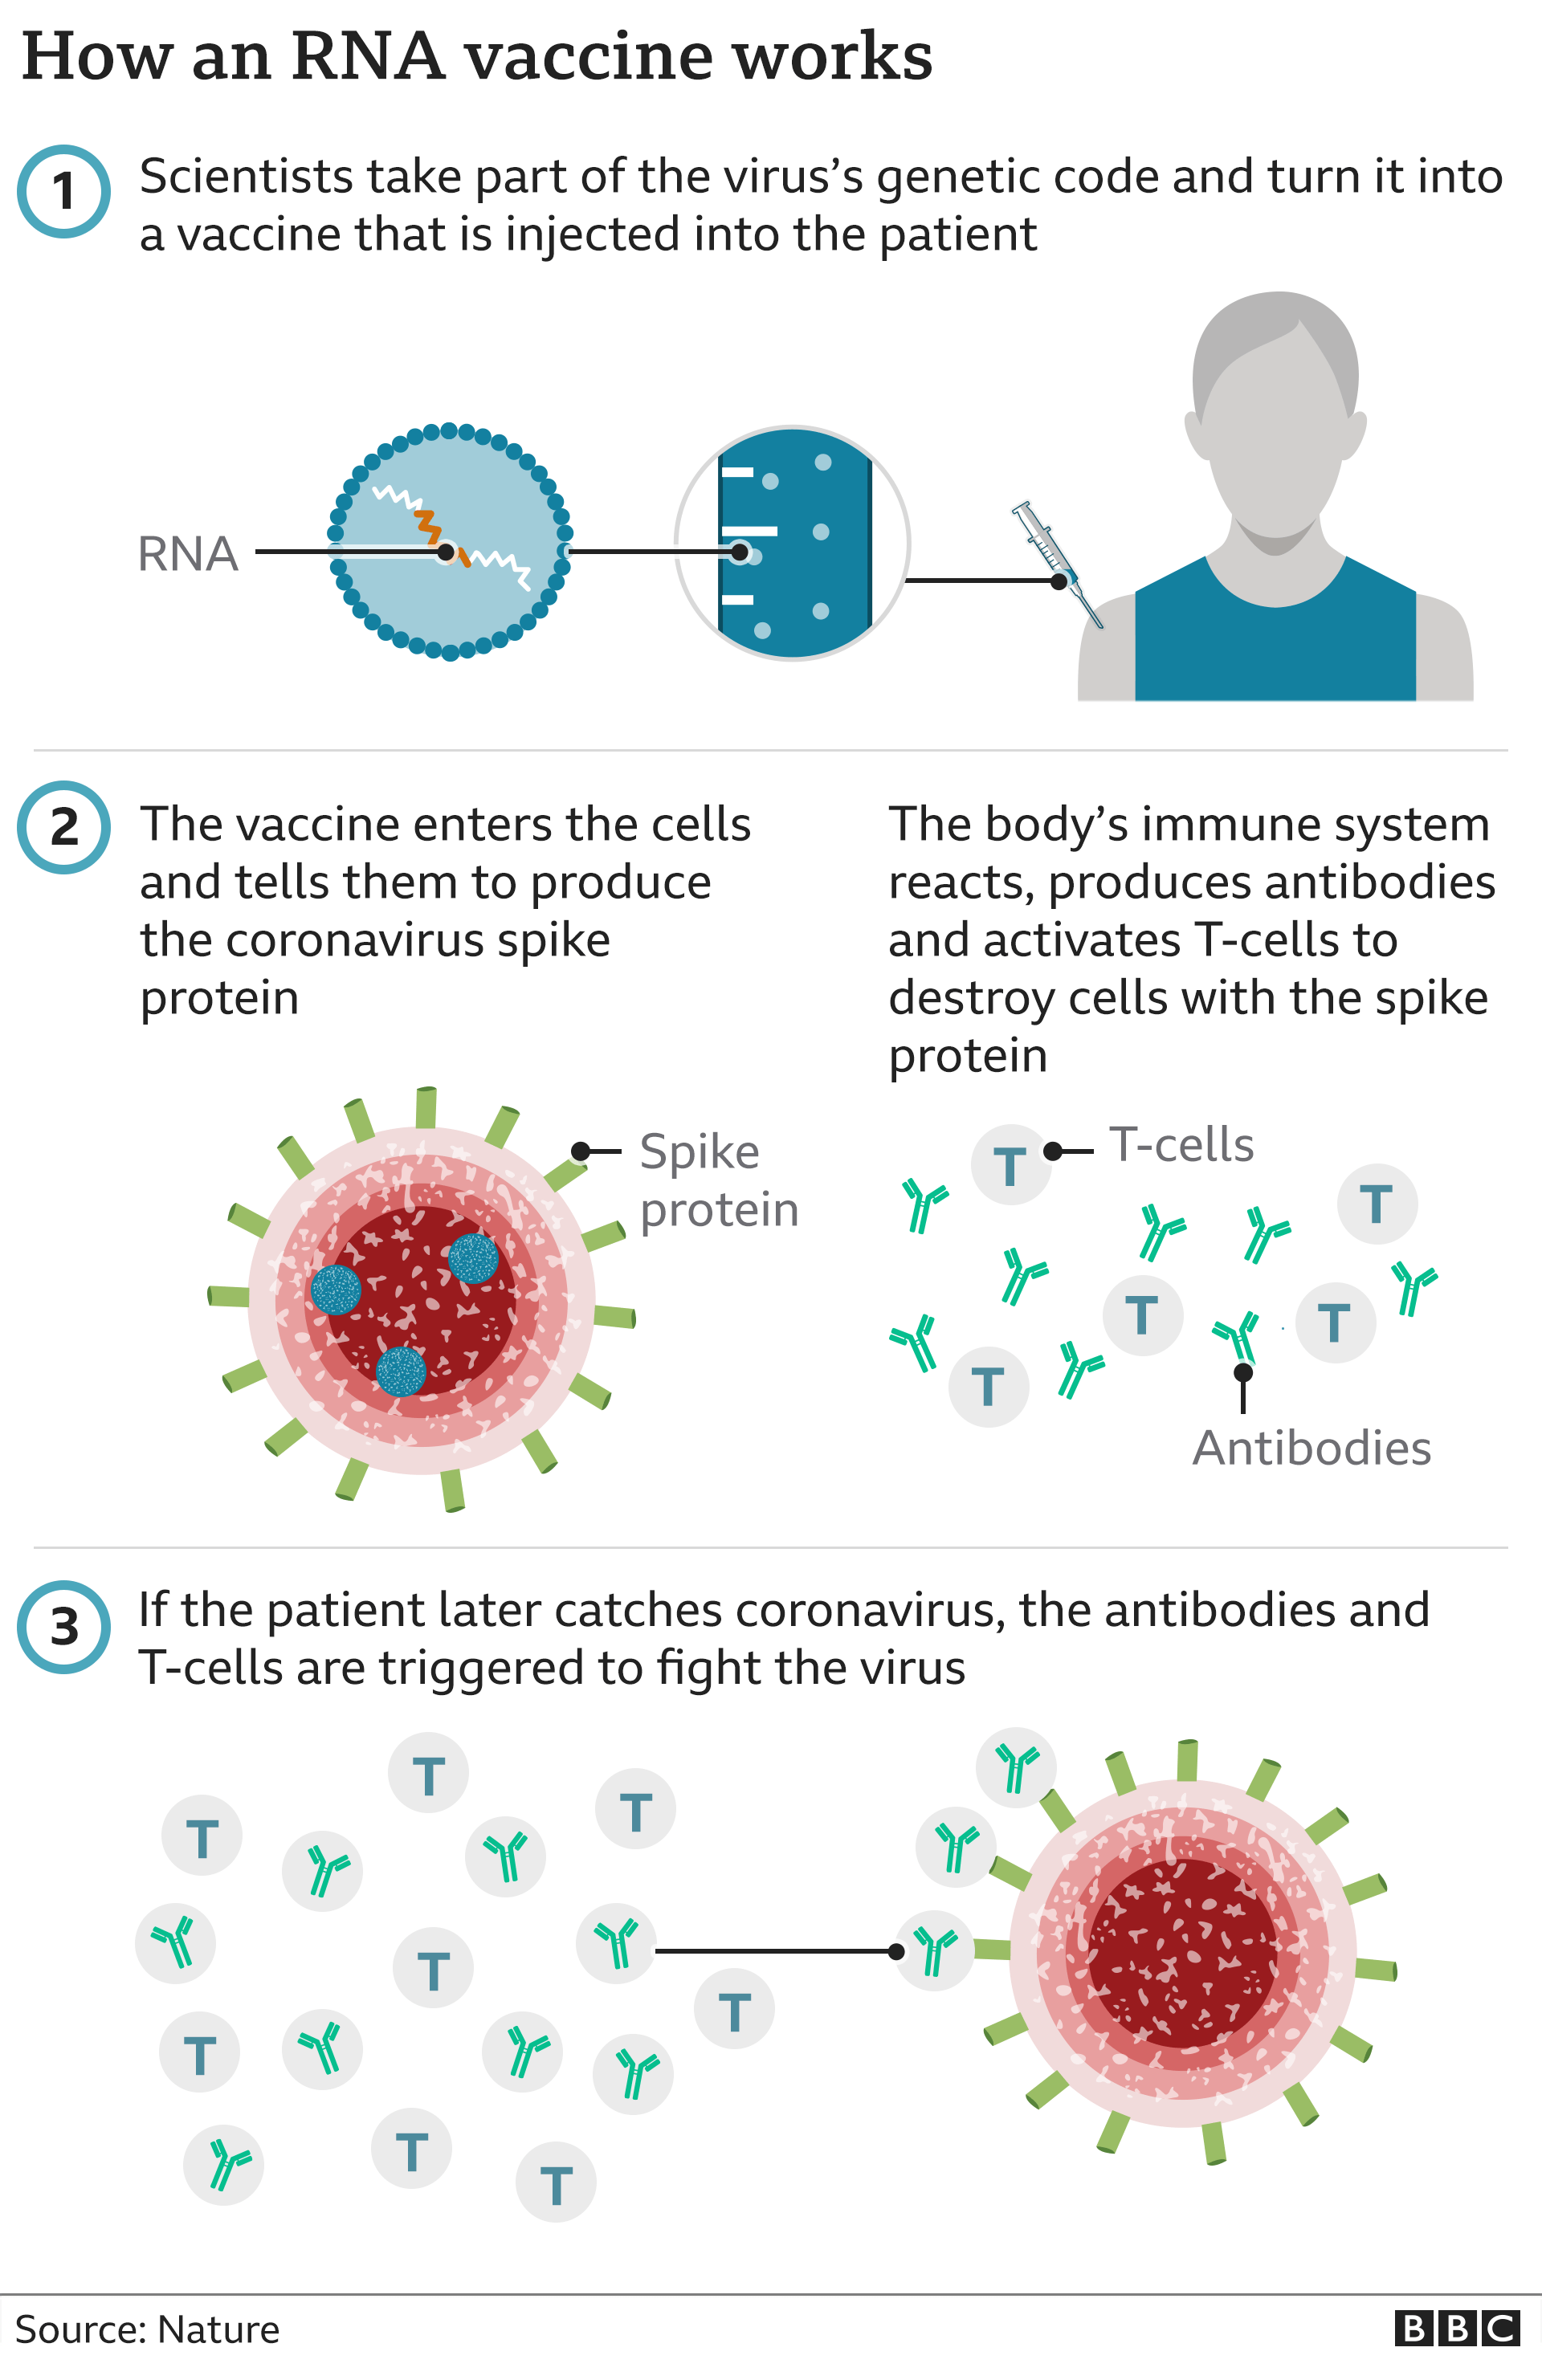 Graphic showing how the vaccine works. 1. Scientists take part of the virus's genetic code and coat it in a fat so it can enter the body's cells 2. The vaccine enters cells and tells them to produce the coronavirus spike protein. The body's immune system reacts and produces antibodies and activates T-cells to destroy them 3. If the patient later catches coronavirus, the antibodies and T-cells are triggered to fight the virus